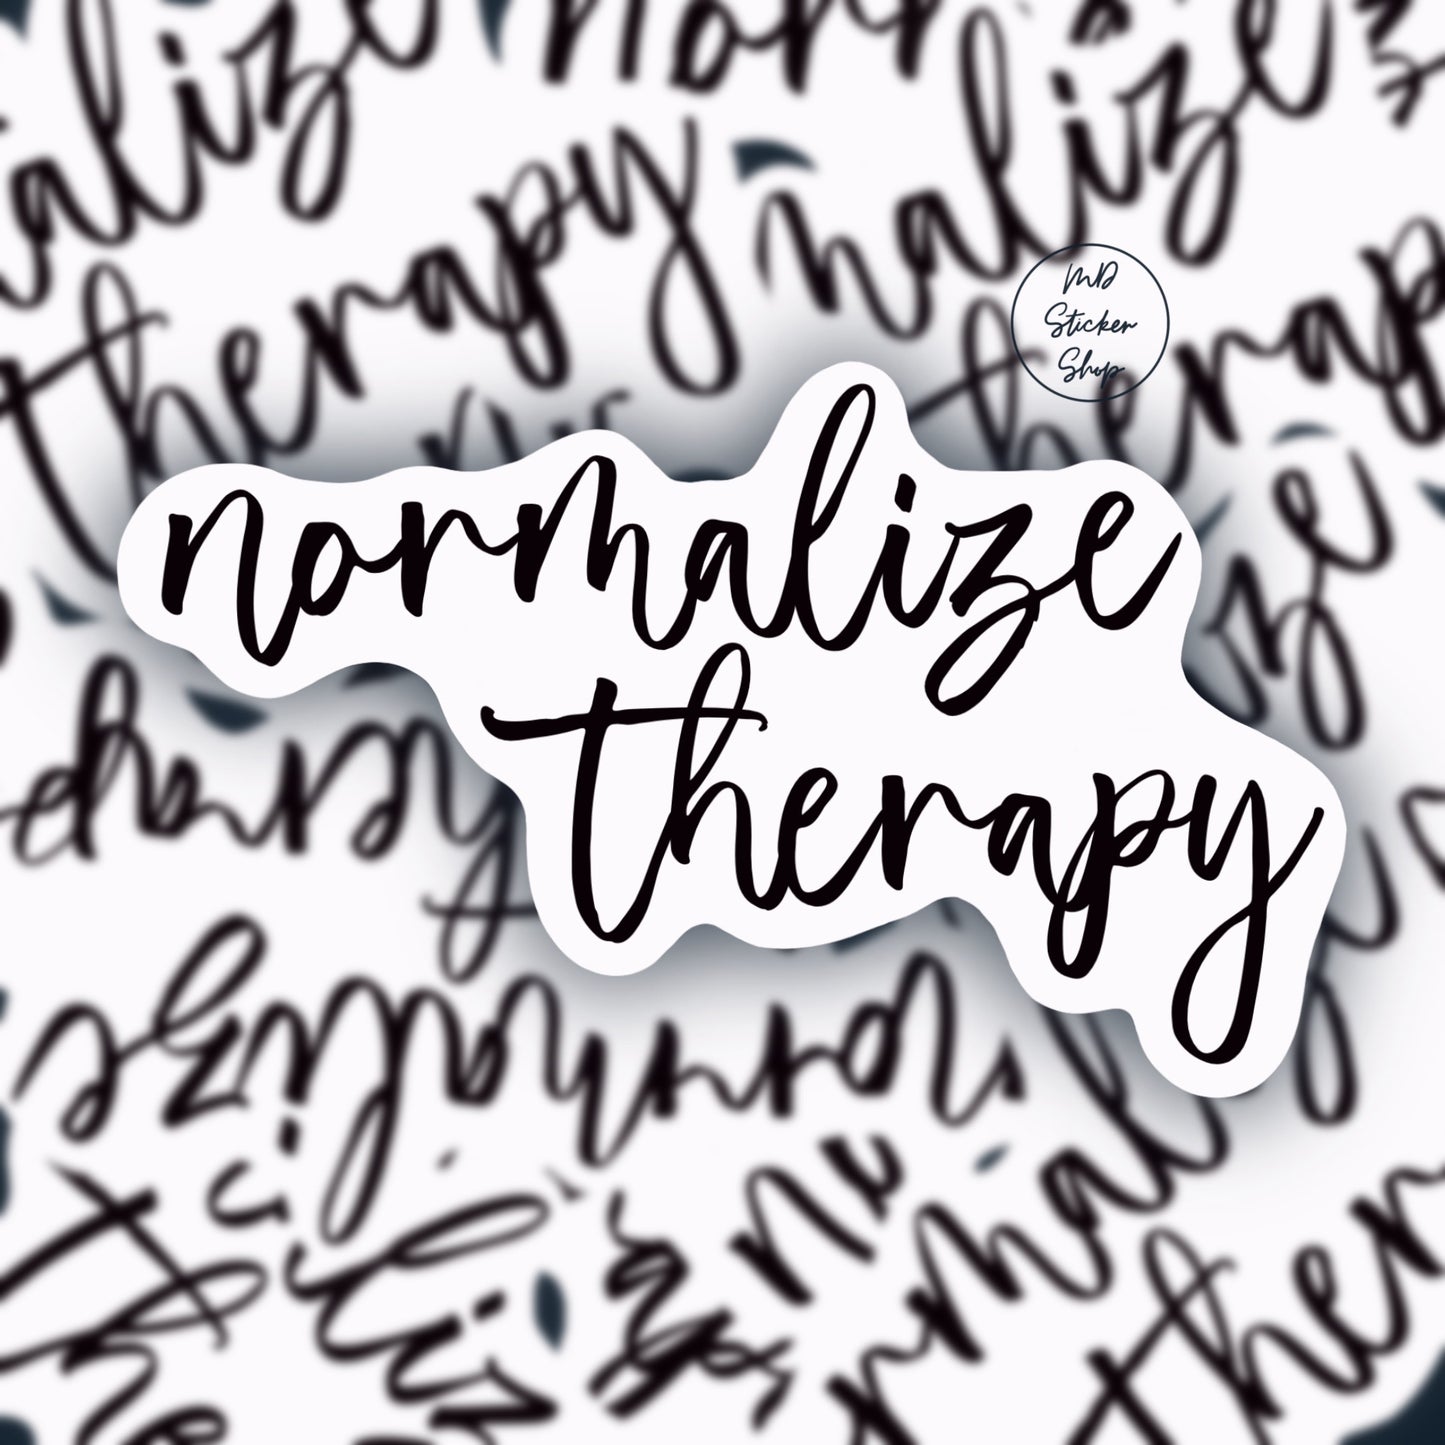 Normalize Therapy Vinyl Sticker